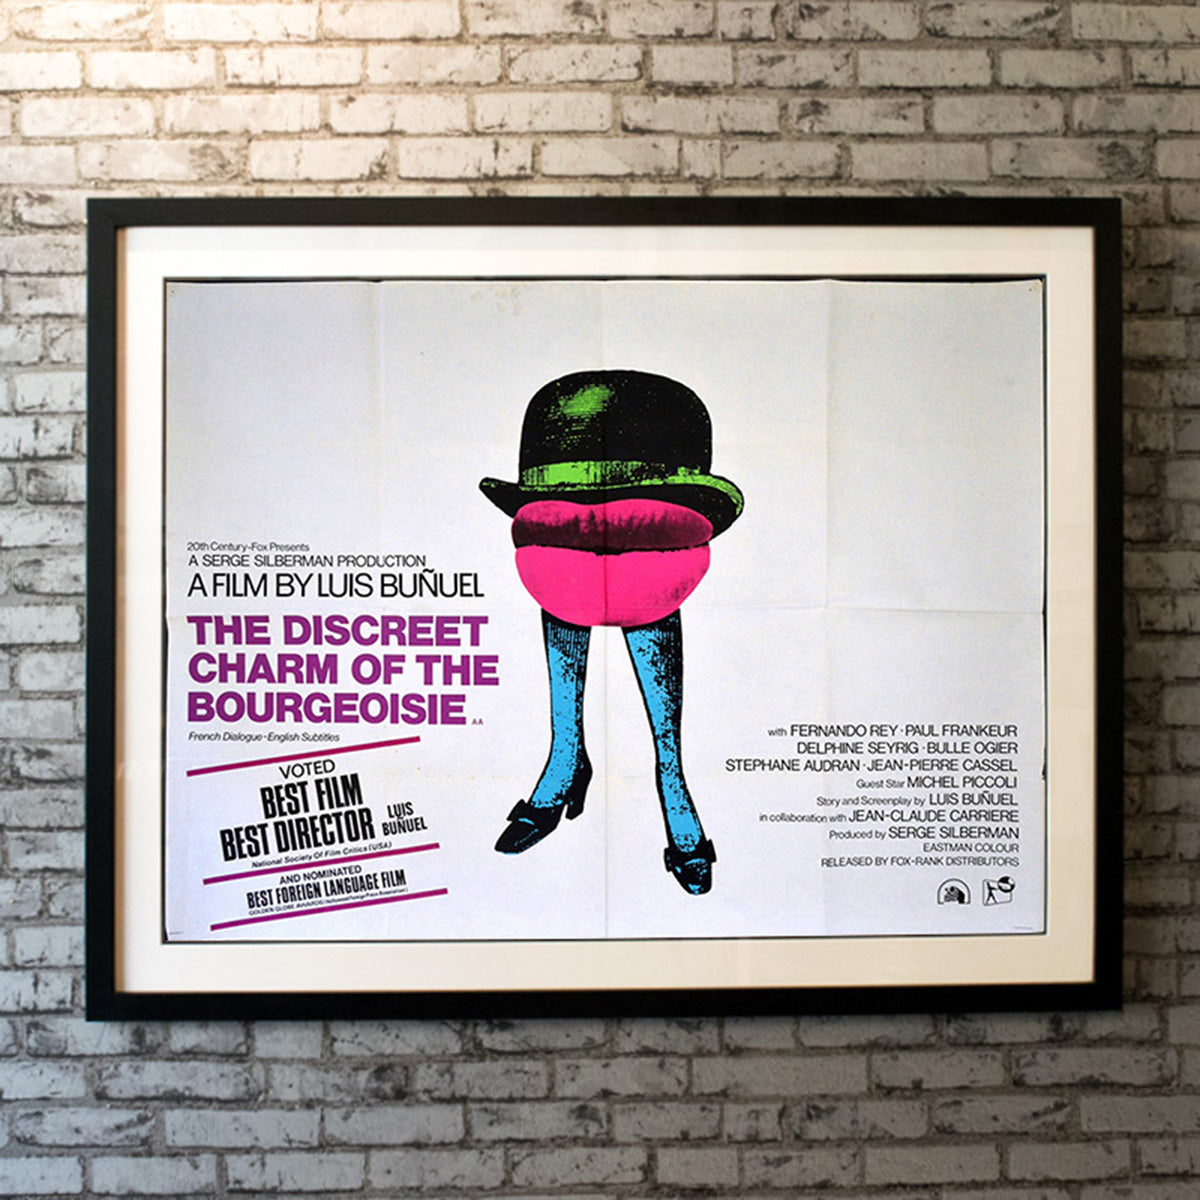 Original Movie Poster of Discreet Charm Of The Bourgeoisie, The (1972)